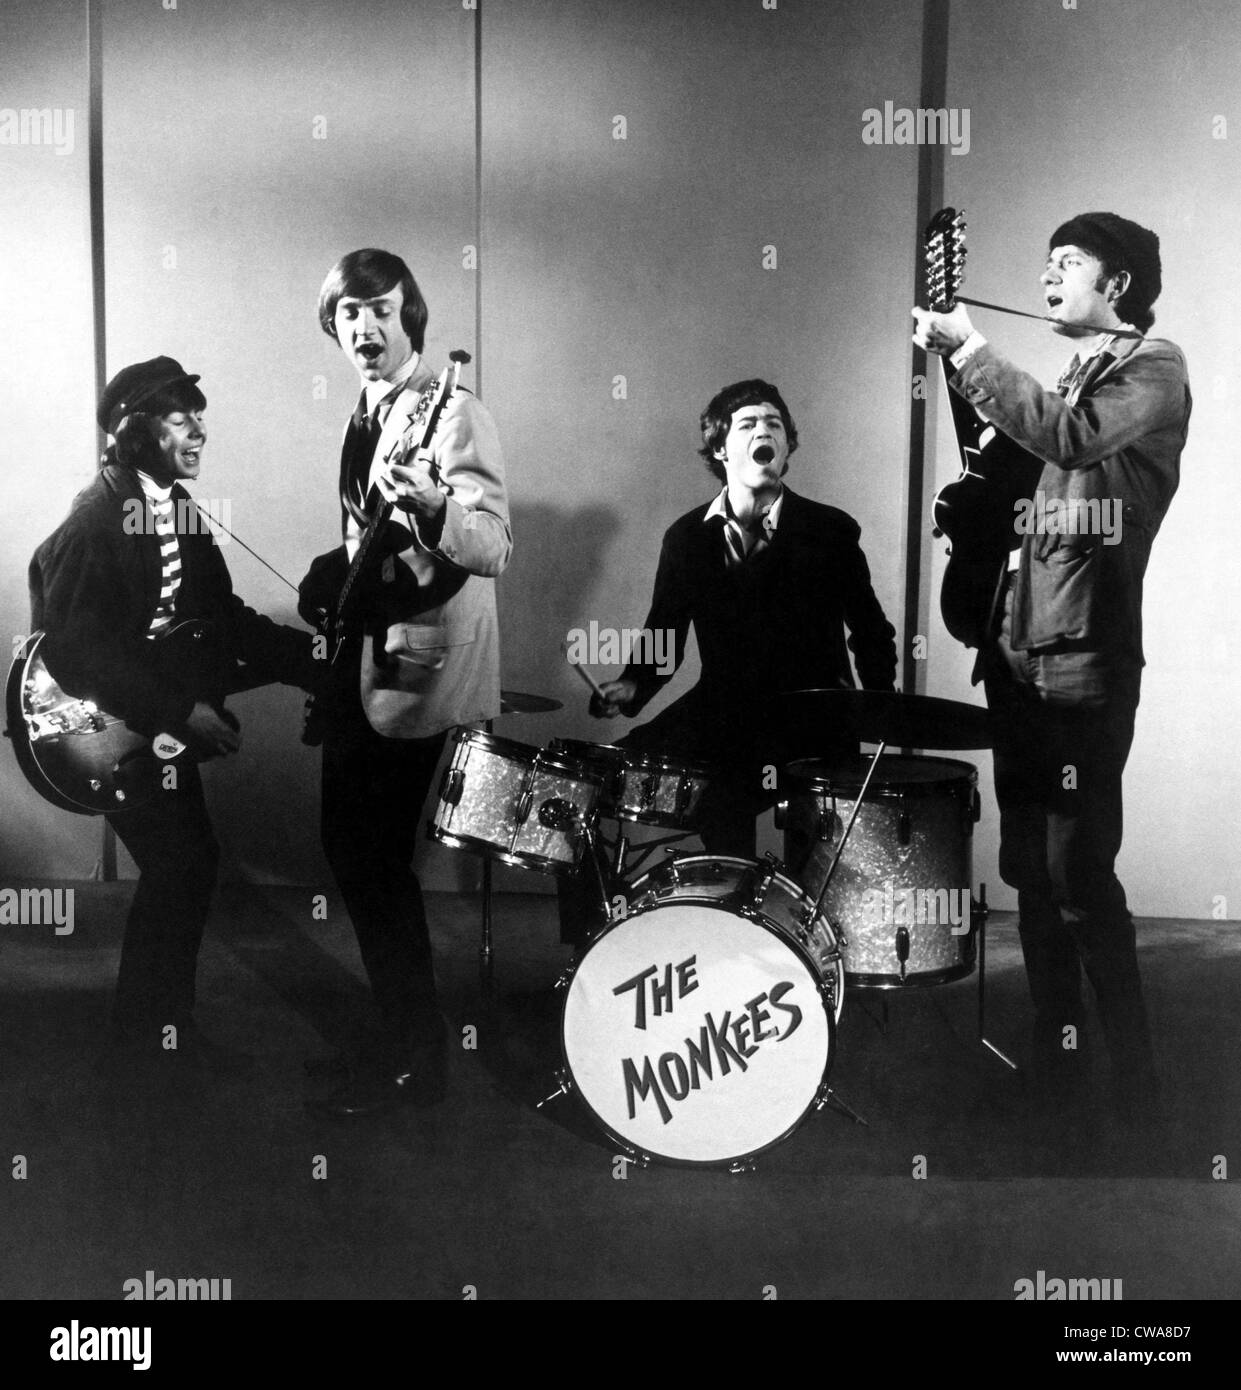 The Monkees, l-r: Davy Jones, Peter Tork, Micky Dolenz, Michael Nesmith, c. 1965.. Courtesy: CSU Archives / Everett Collection Stock Photo